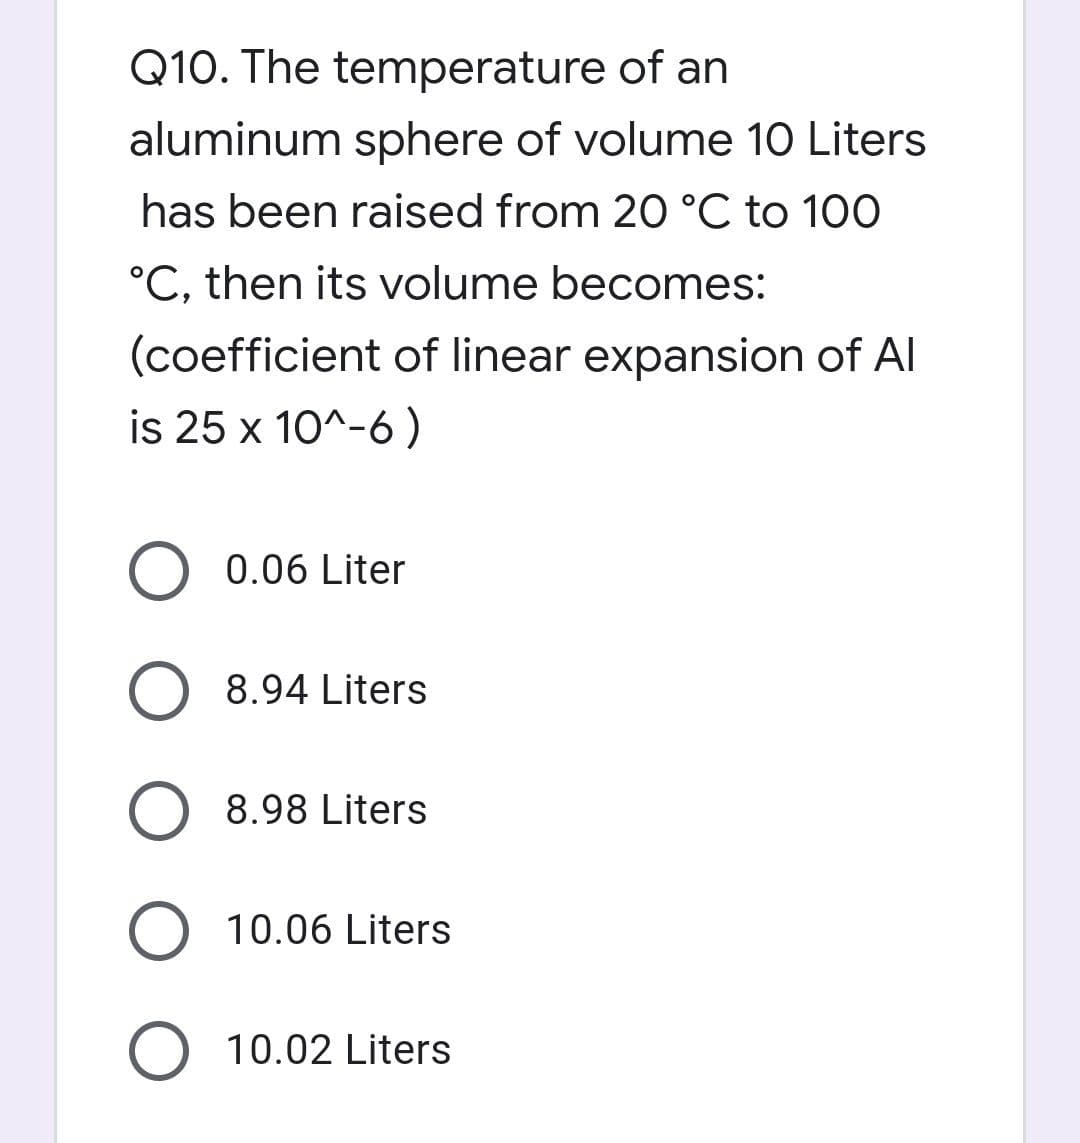 Q10. The temperature of an
aluminum sphere of volume 10 Liters
has been raised from 20 °C to 100
°C, then its volume becomes:
(coefficient of linear expansion of Al
is 25 x 10^-6)
O 0.06 Liter
O 8.94 Liters
O 8.98 Liters
O 10.06 Liters
O 10.02 Liters